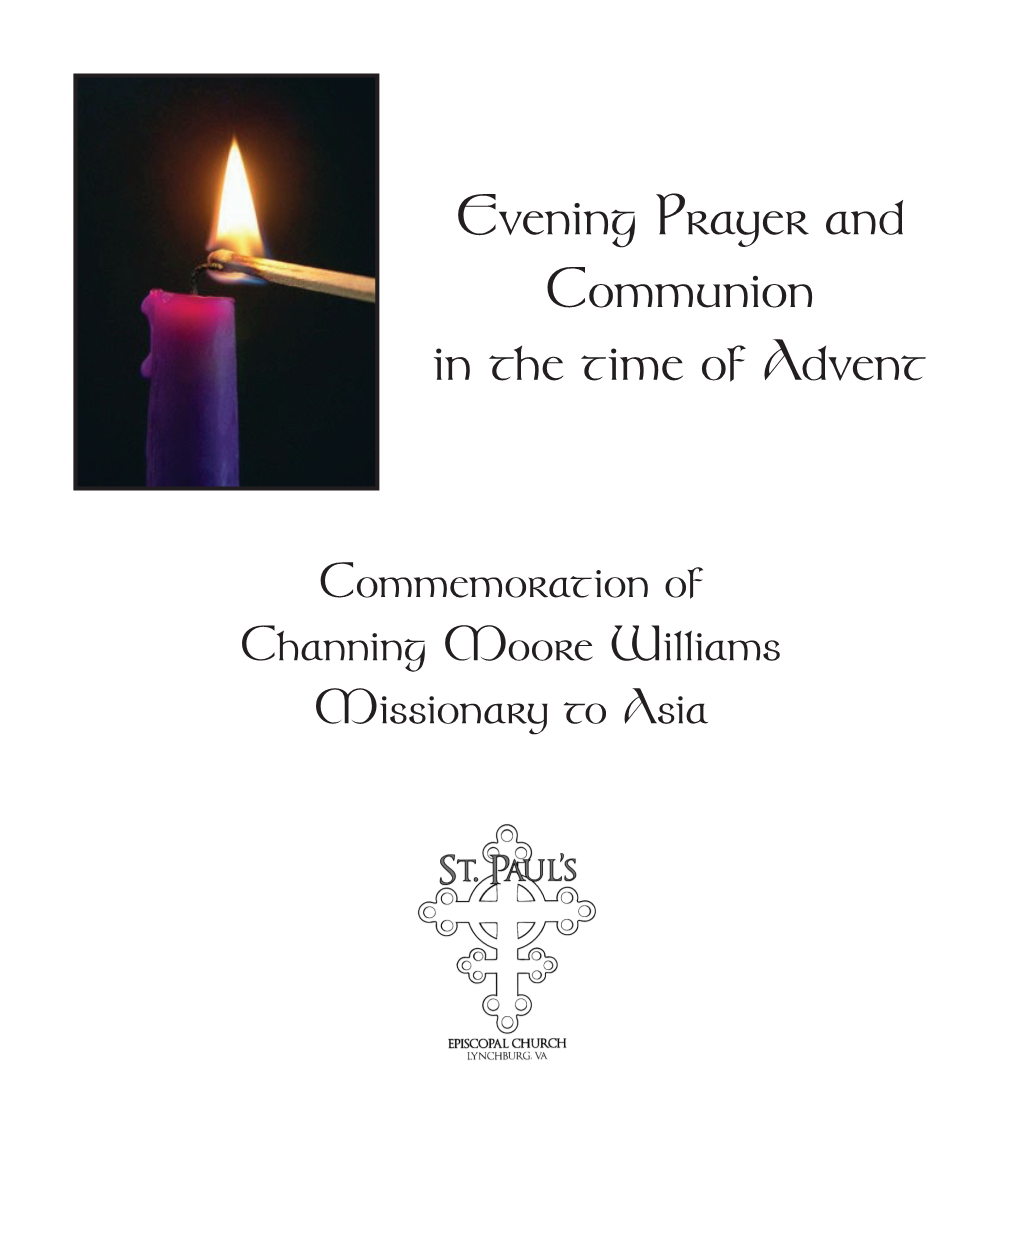 Evening Prayer and Communion in the Time of Advent